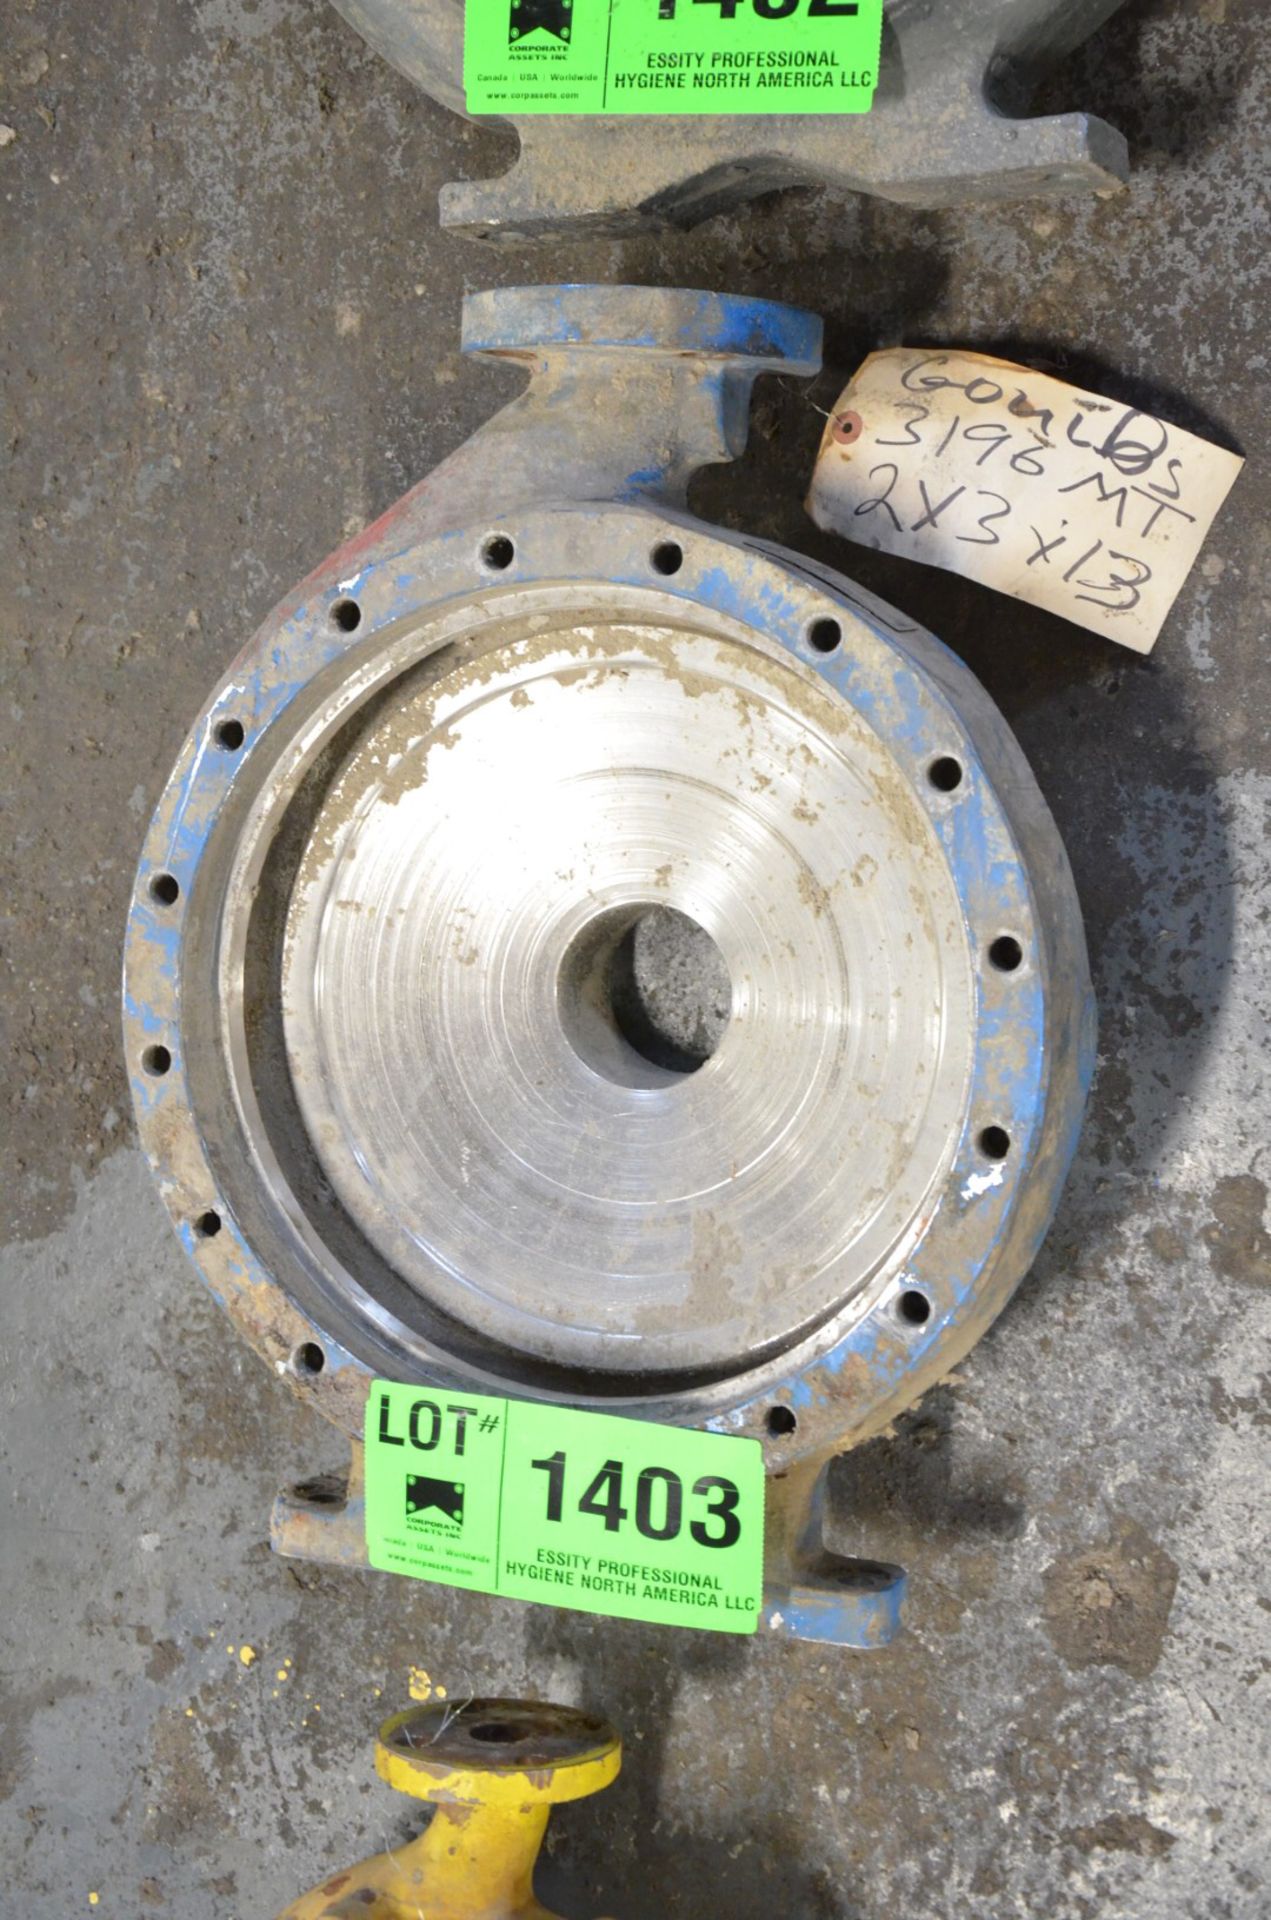 GOULDS 3196 2X3-13 PUMP HOUSING [RIGGING FEE FOR LOT #1403 - $25 USD PLUS APPLICABLE TAXES]